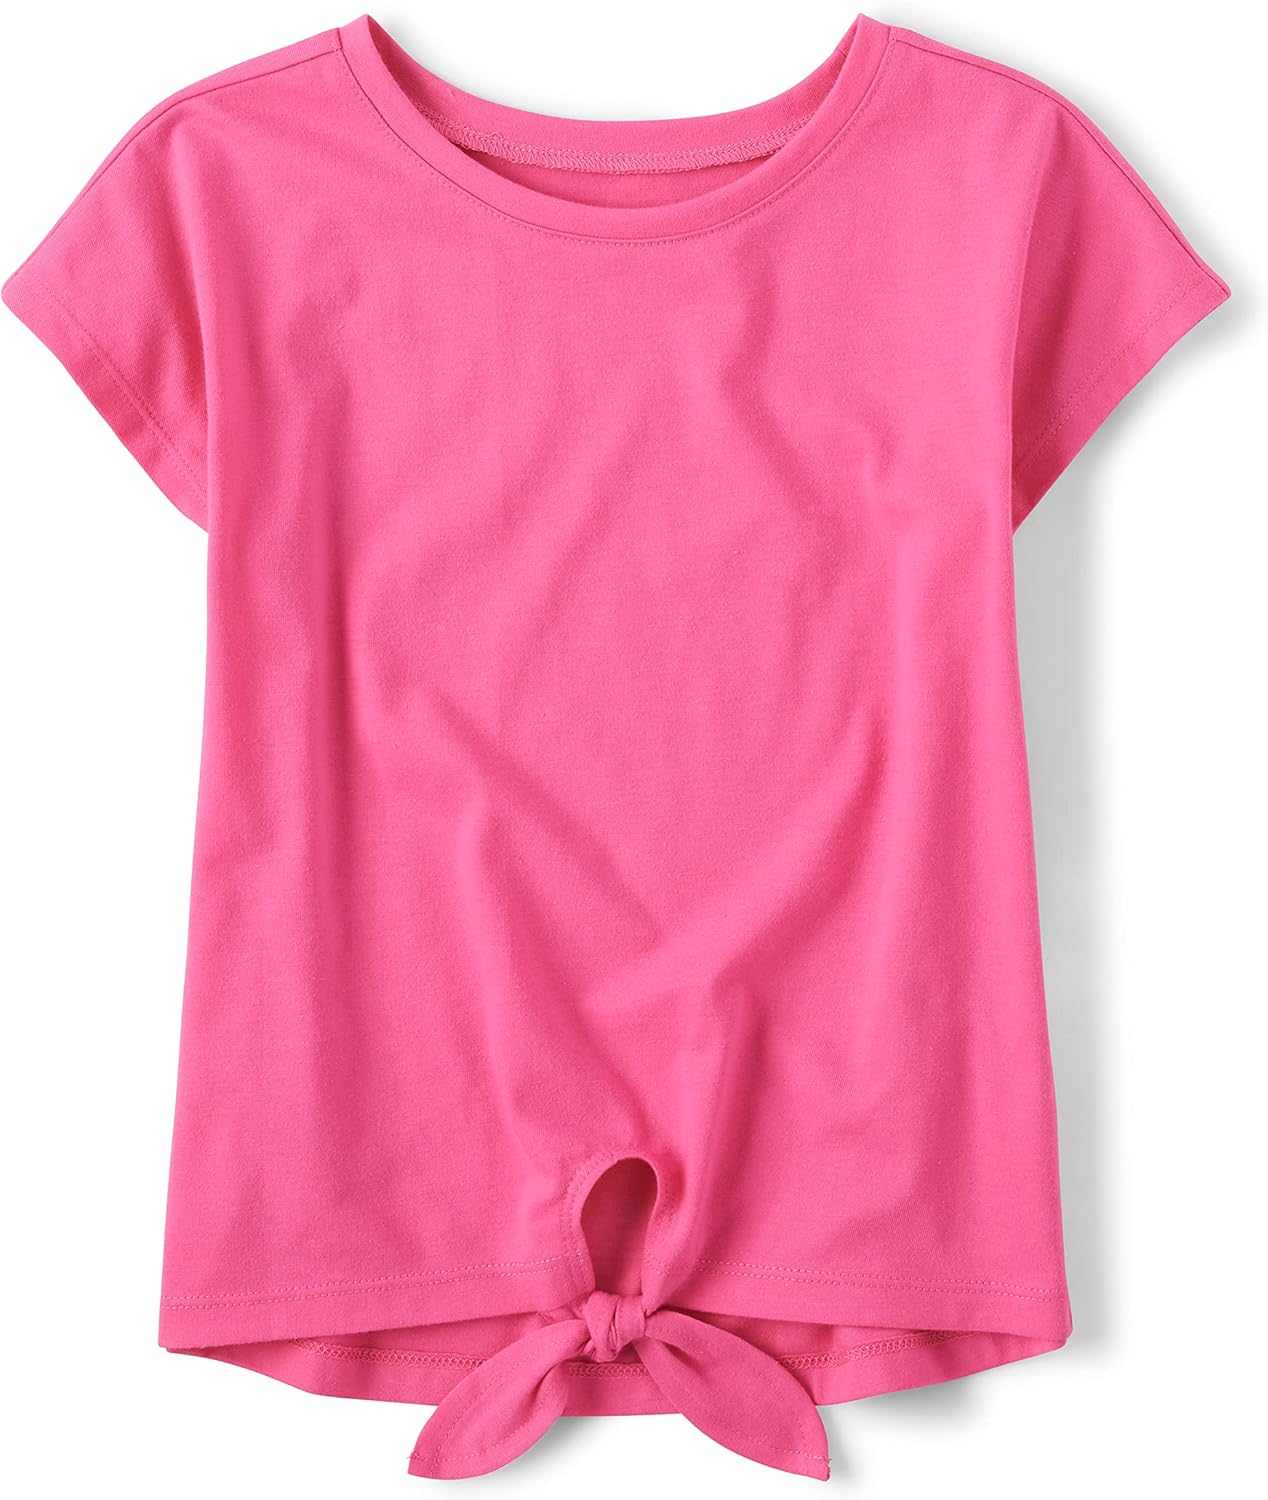 The Children’s Place Girls’ Short Sleeve Tie Front Top